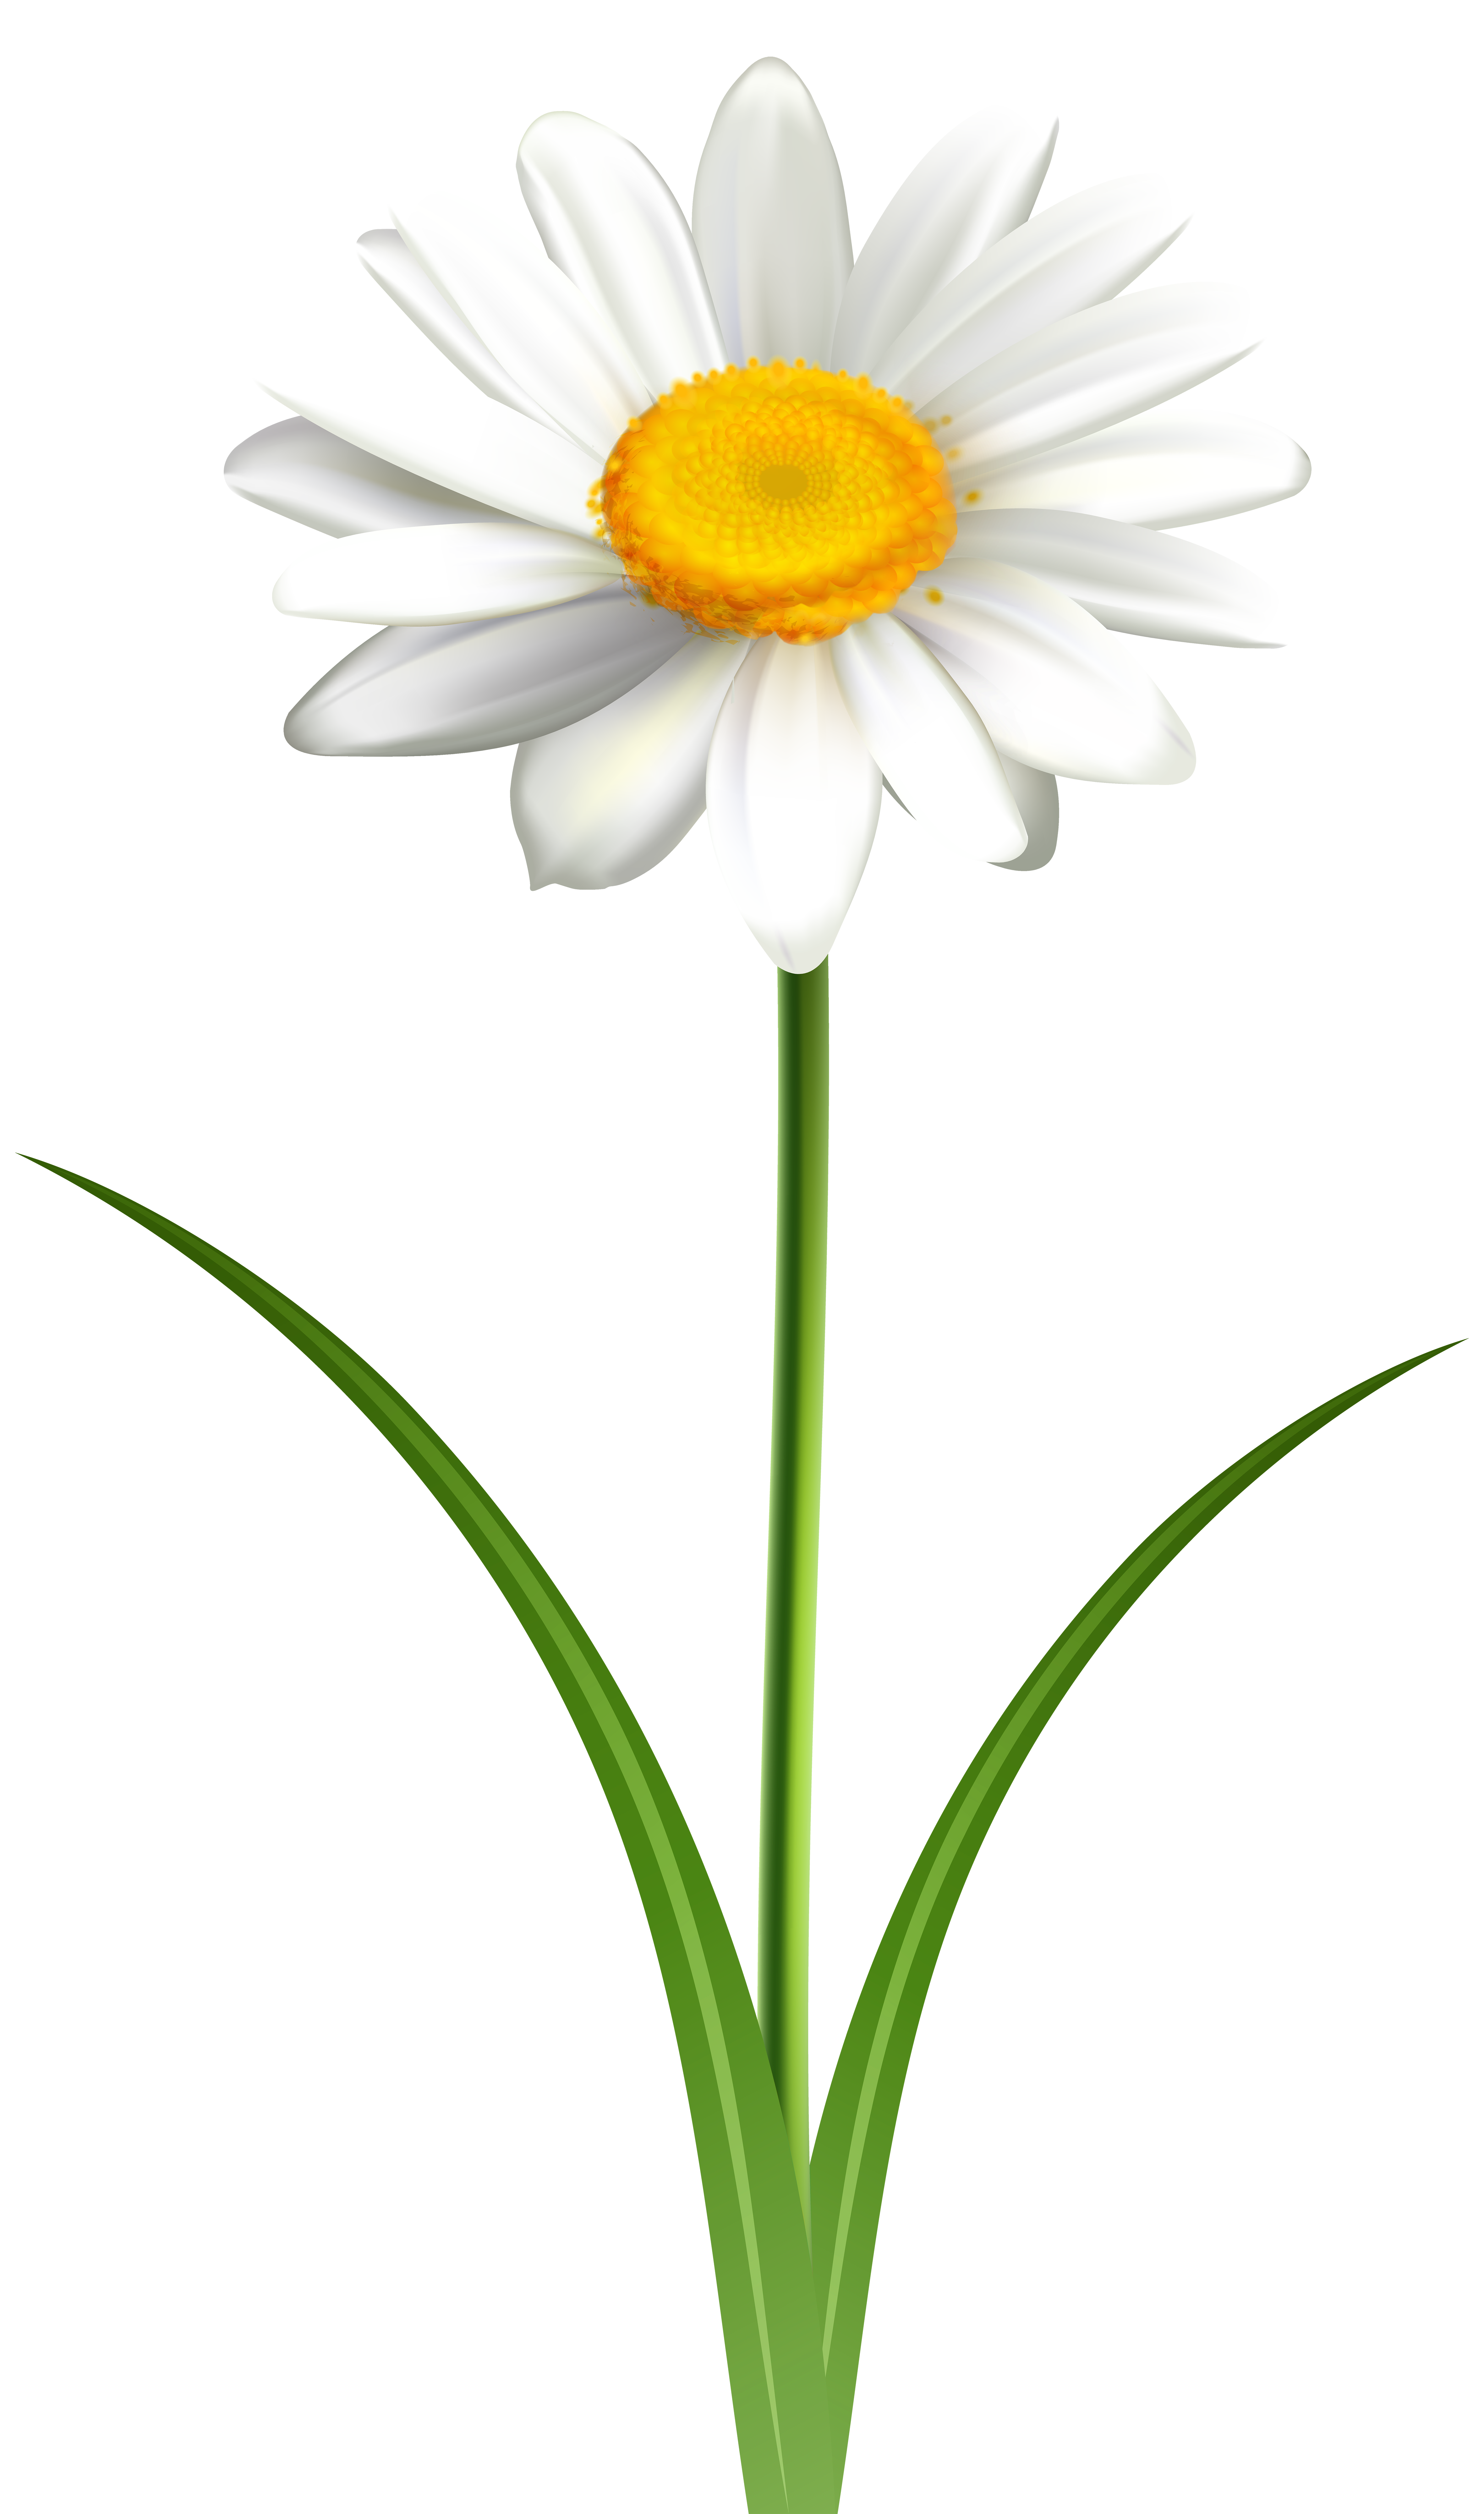 Daisies clipart flowr, Daisies flowr Transparent FREE for download on ...